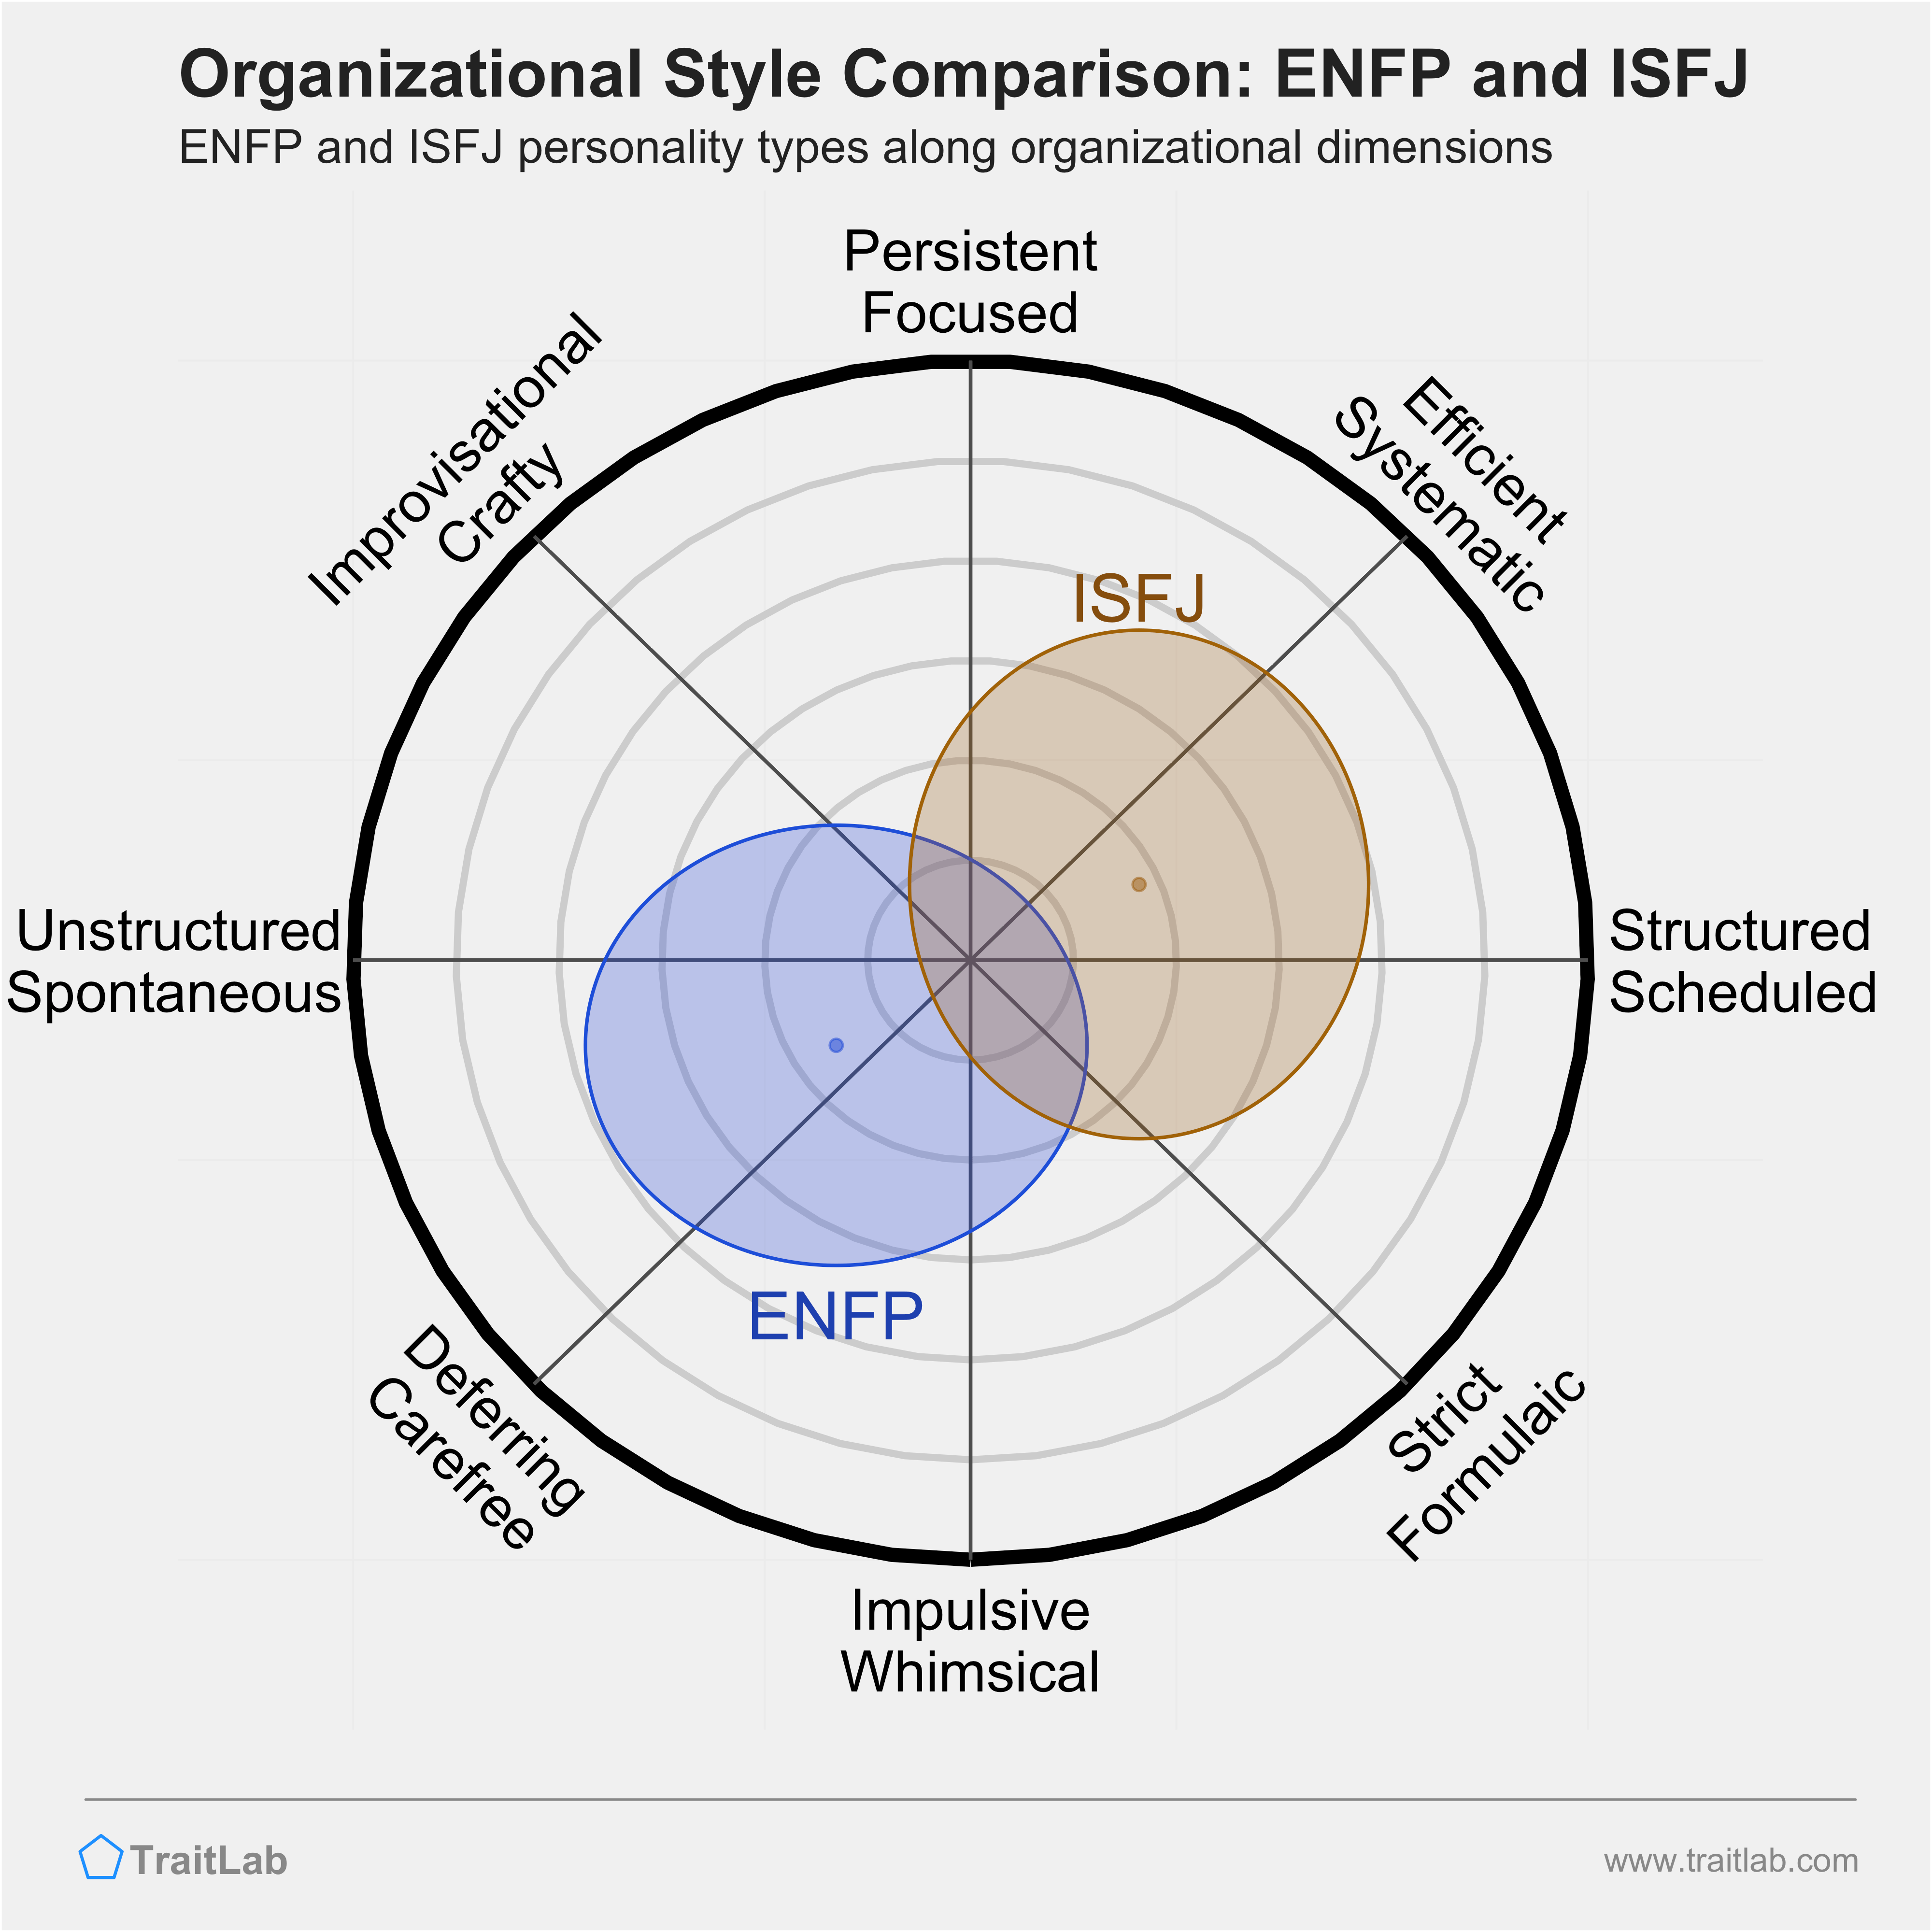 ENFP and ISFJ comparison across organizational dimensions